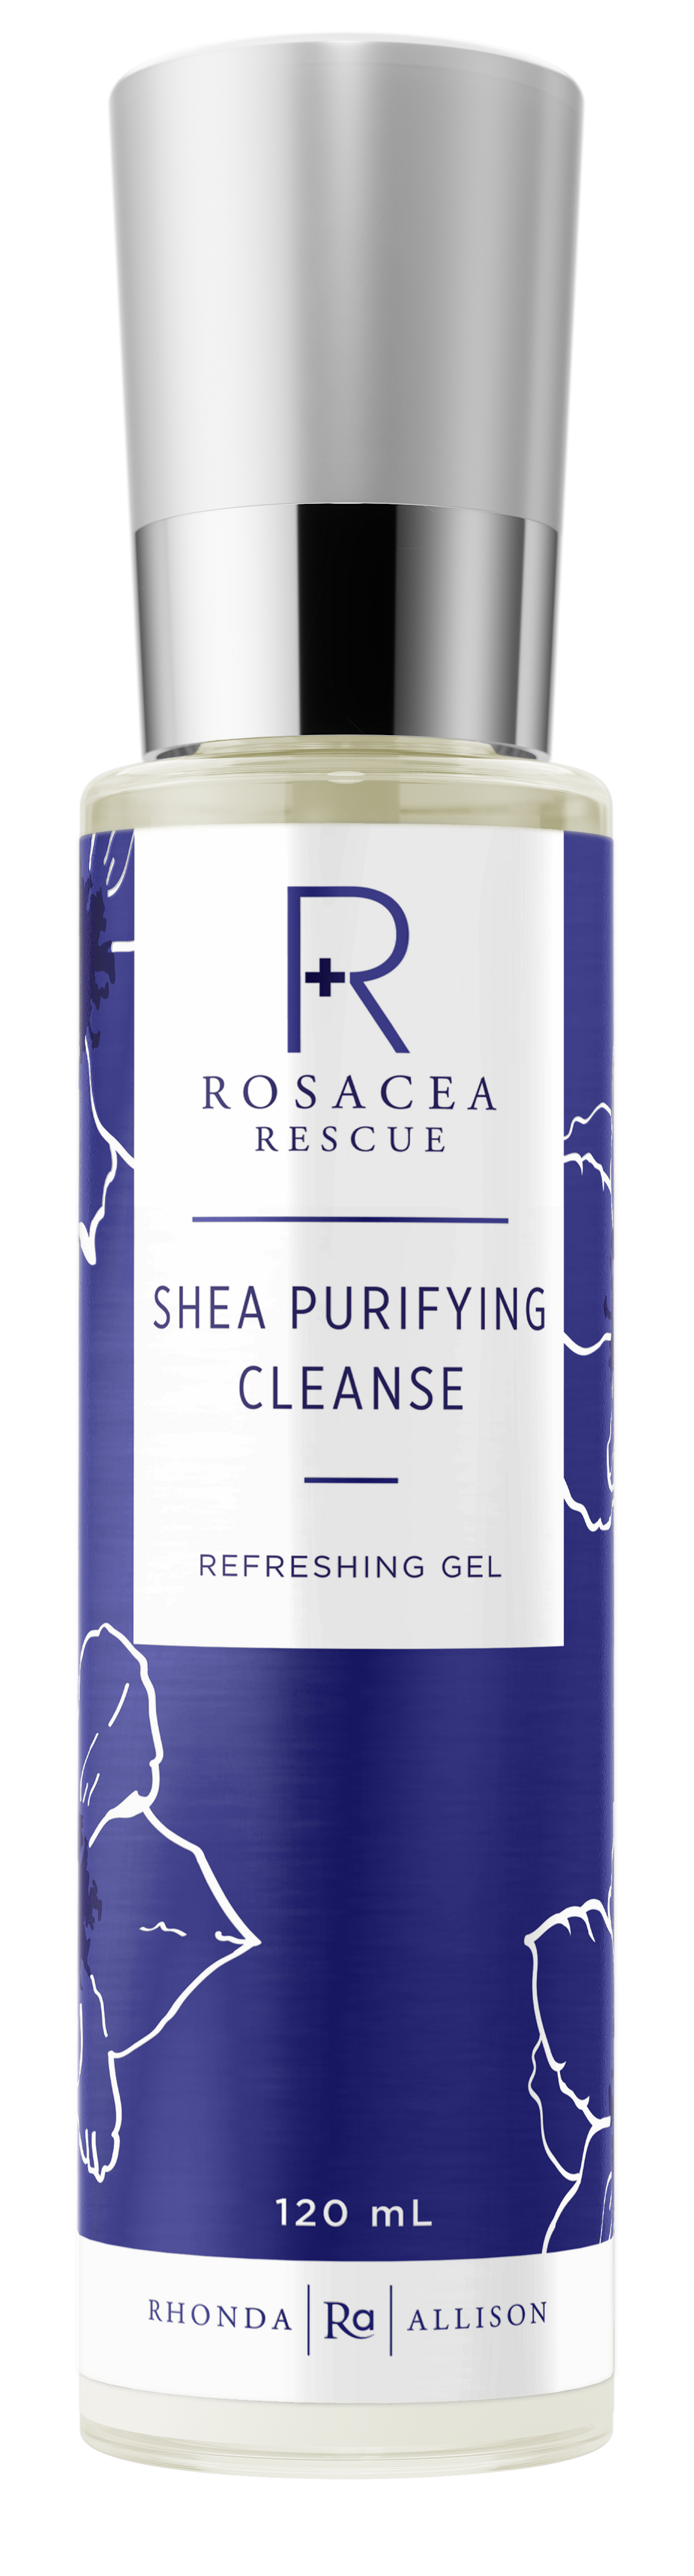 Shea Purifying Cleanse - 15% off